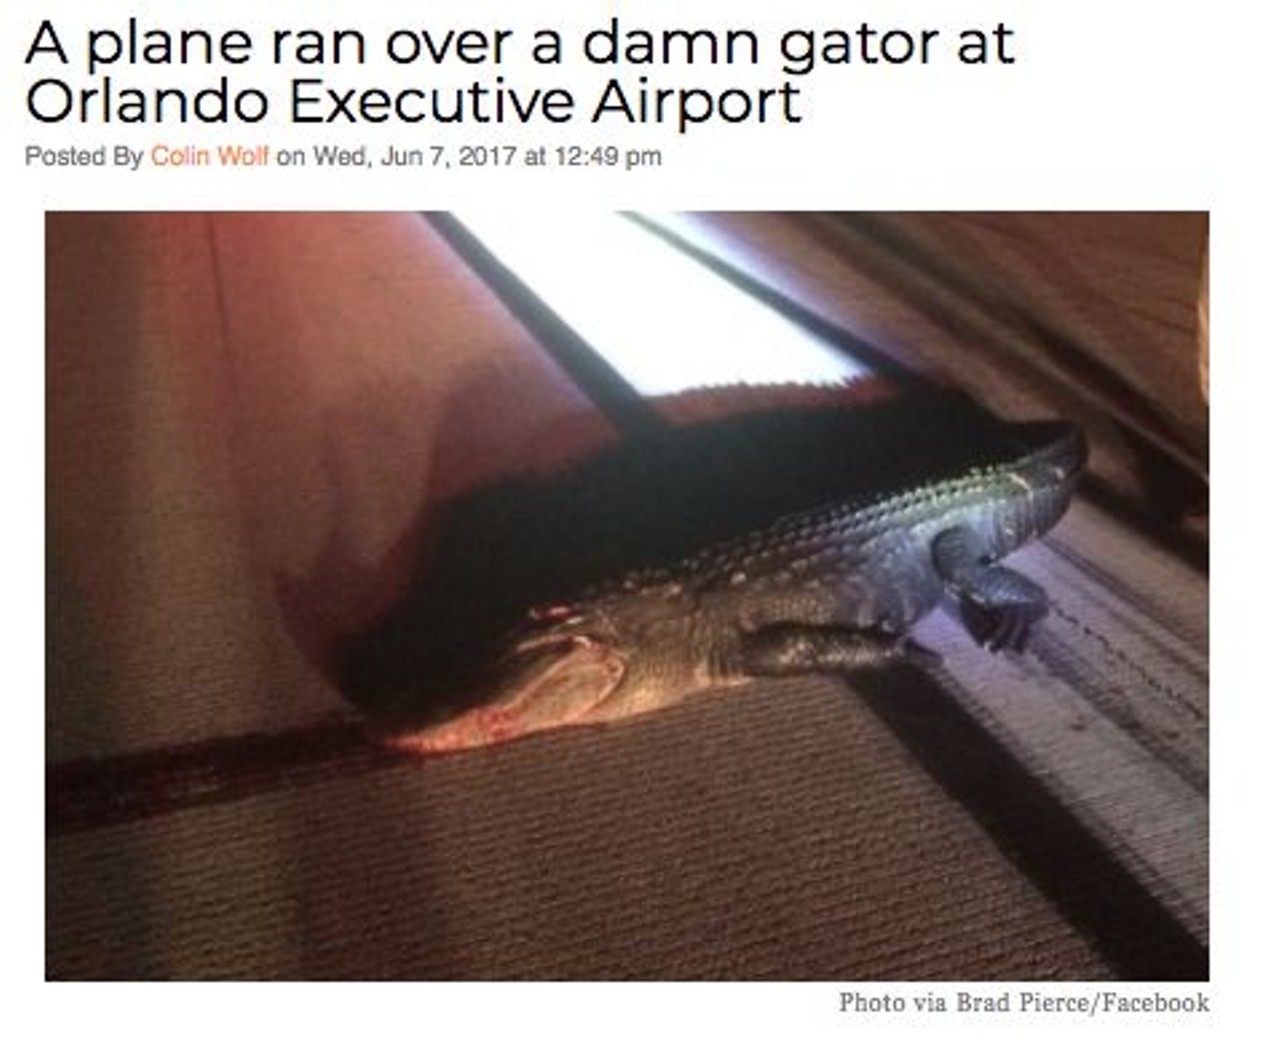 A plane ran over and killed an 11-foot alligator at Orlando Executive Airport. Read more